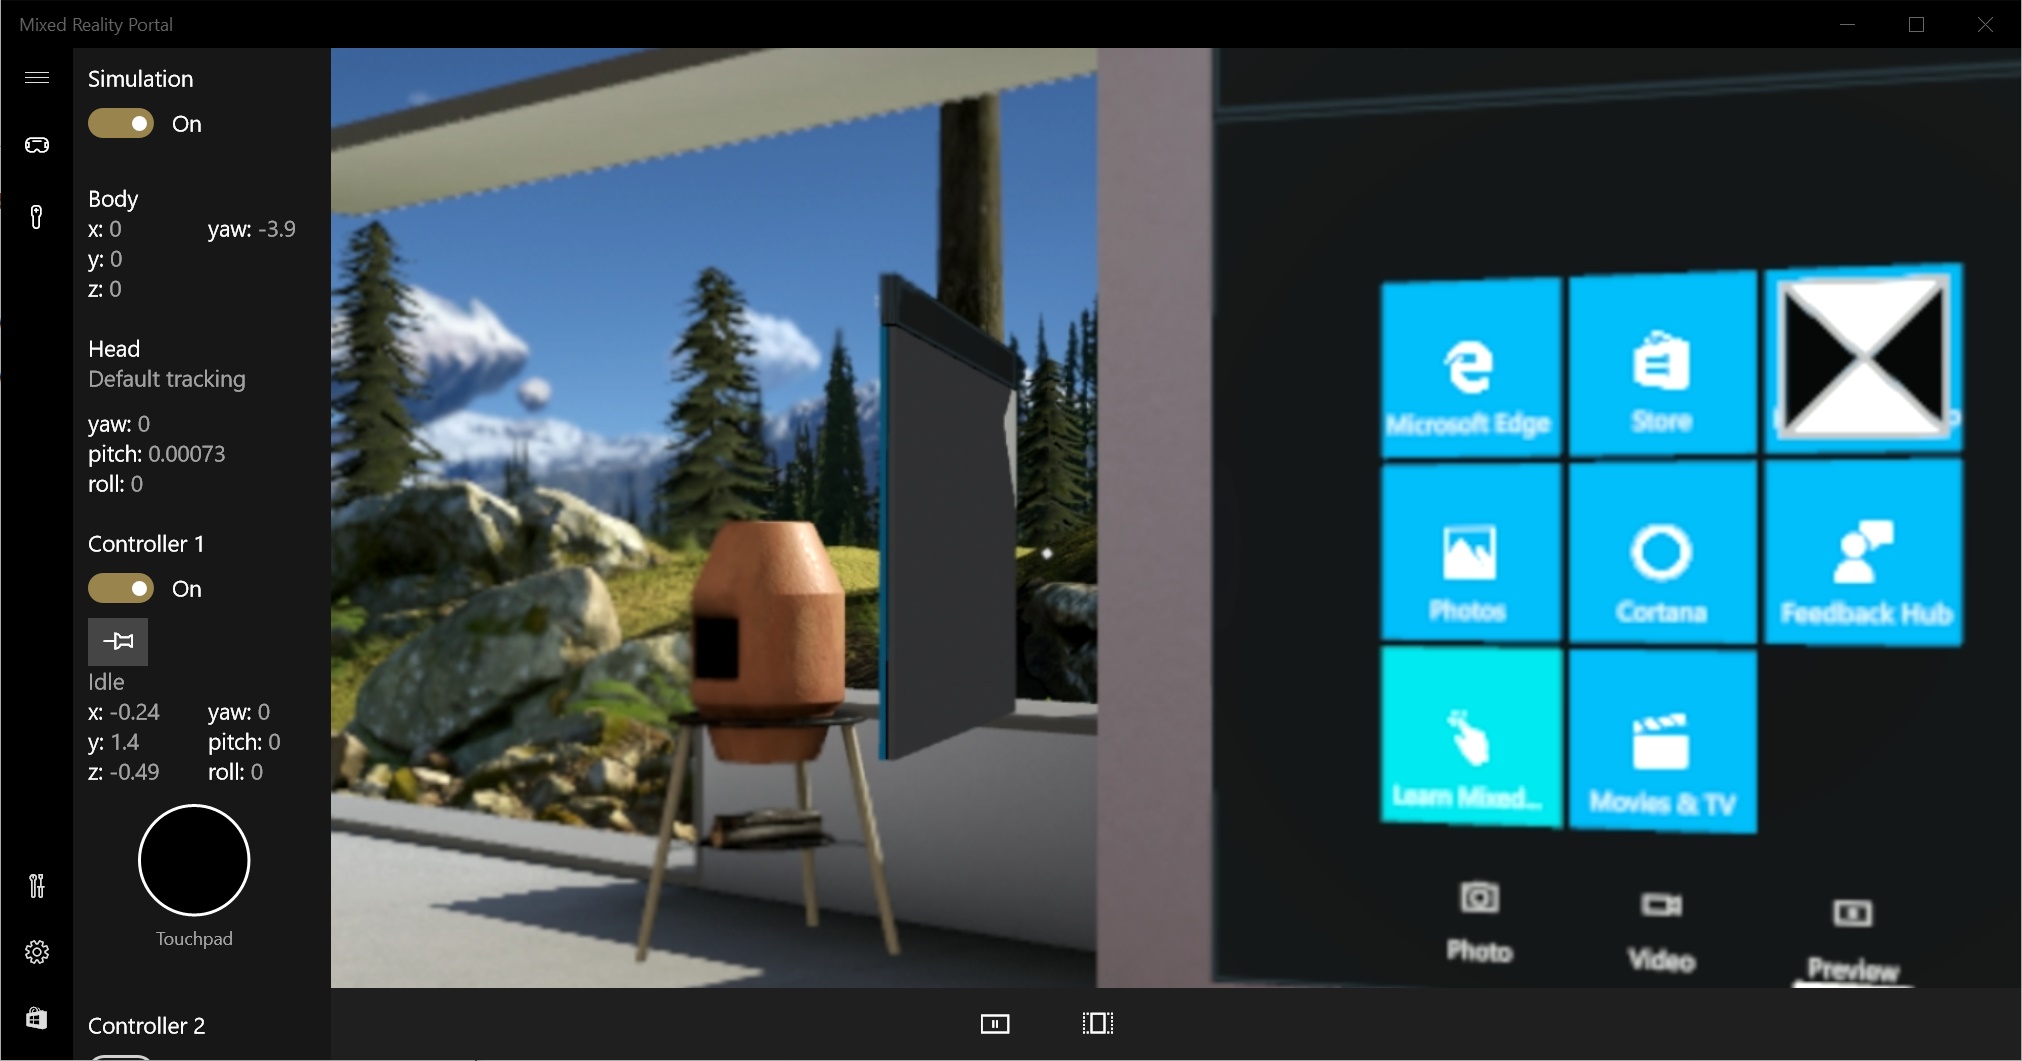 Latest Windows 10 preview build brings Mixed Reality to Windows PCs